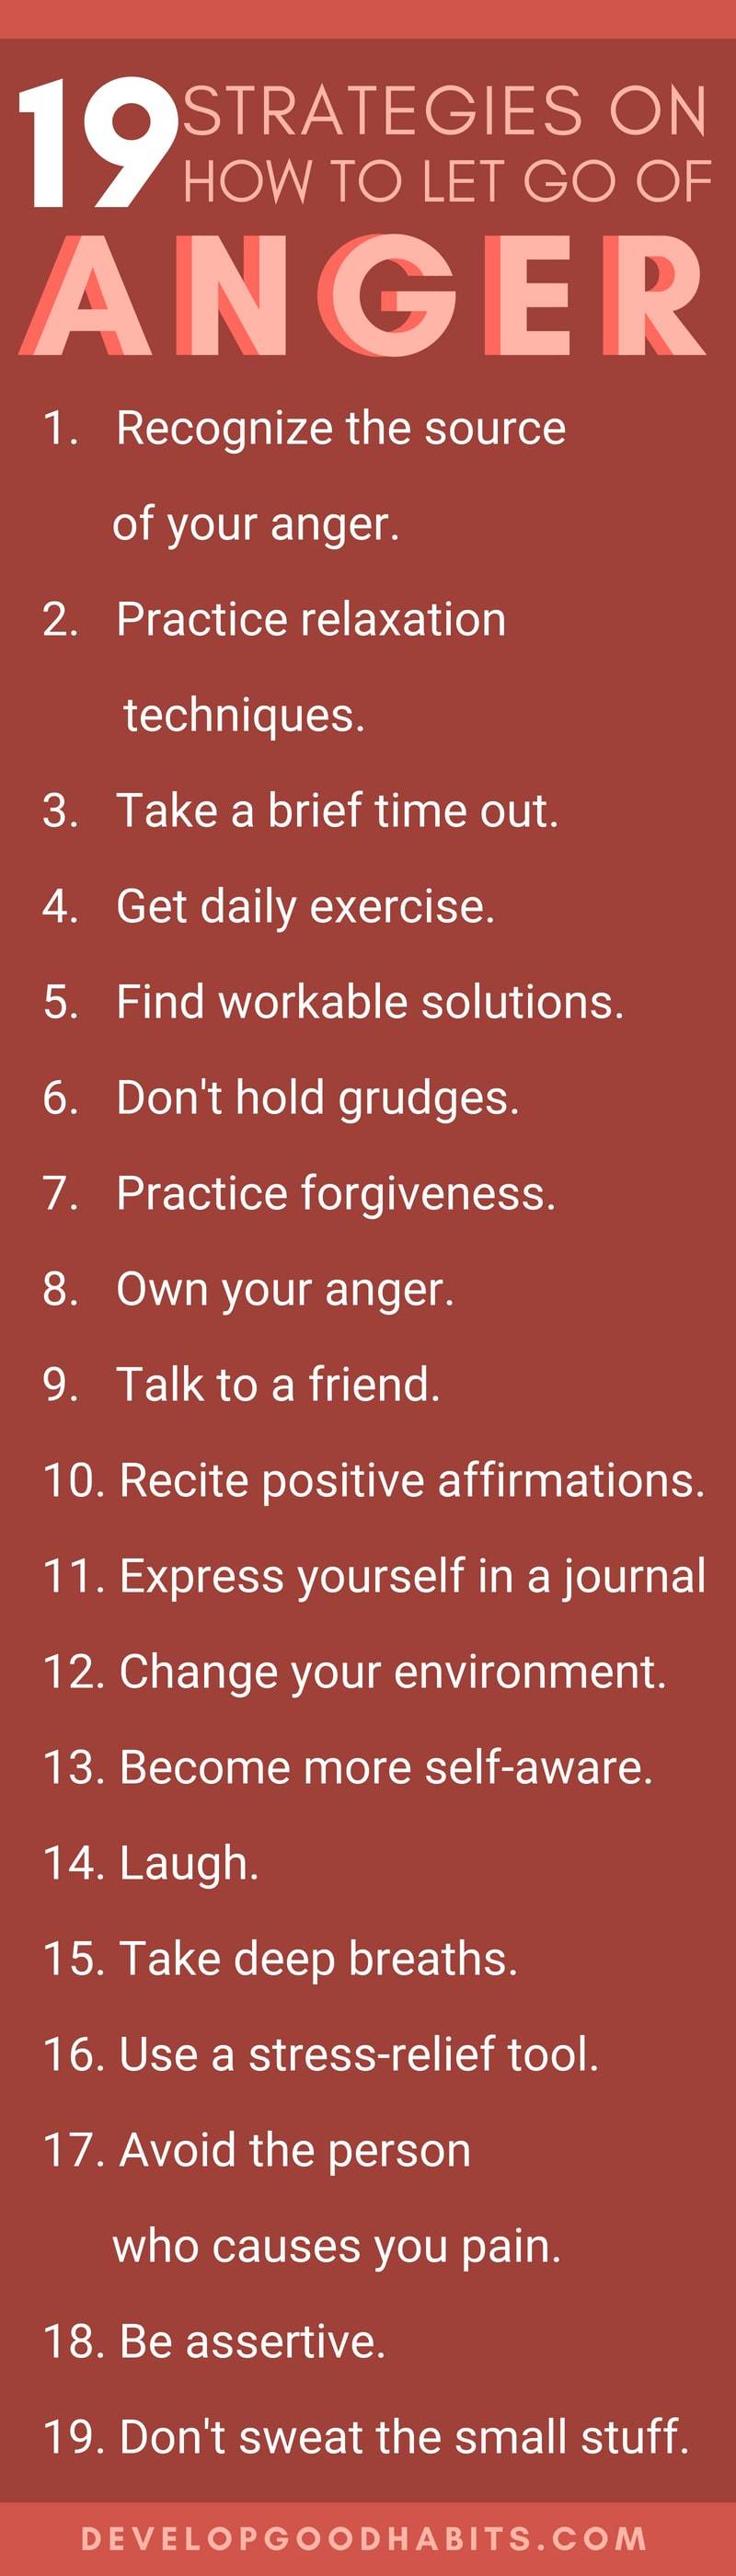 How to Let Go of Anger and Resentment and how to let go of the past and move forward. #infographic #psychology #mentalhealth #mindset #positivethinking #positivity #anxiety #happiness #selfimprovement #relationship #menandwomen